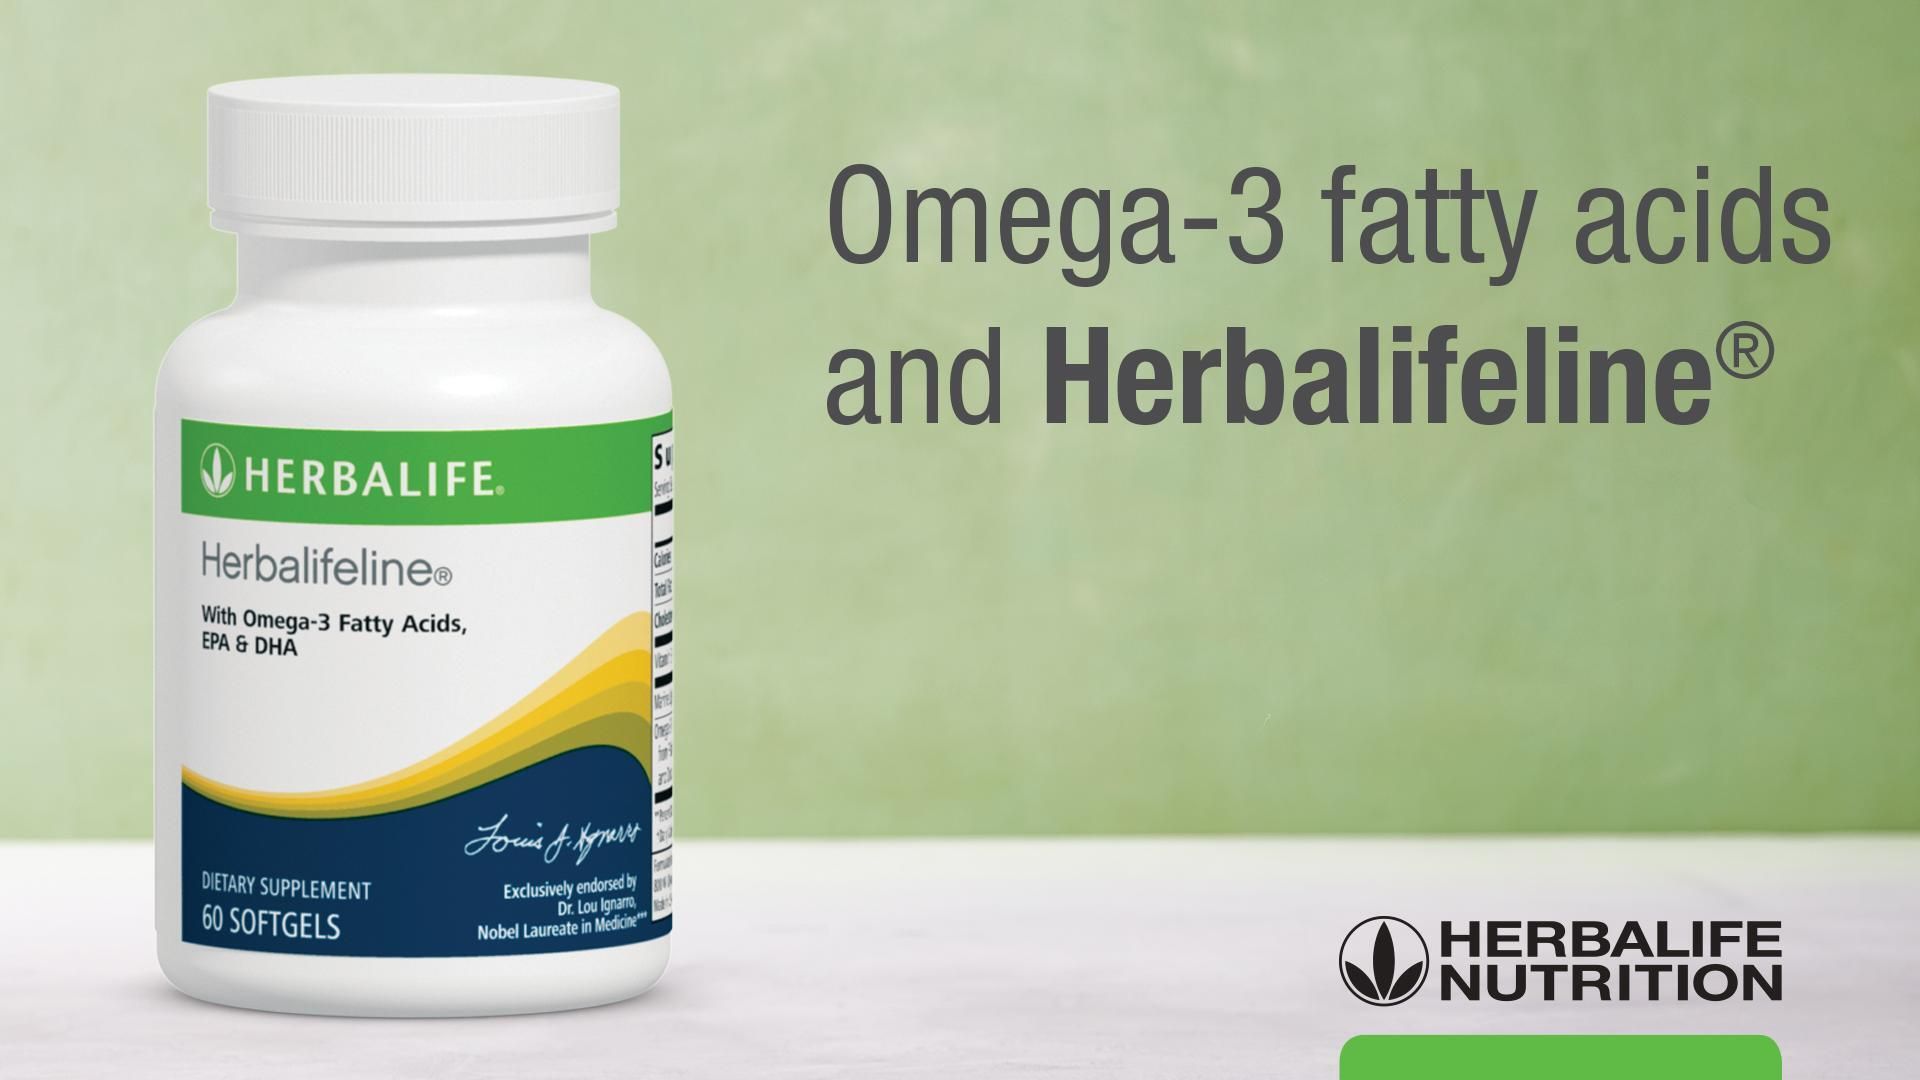 Herbalifeline®: Know the Products